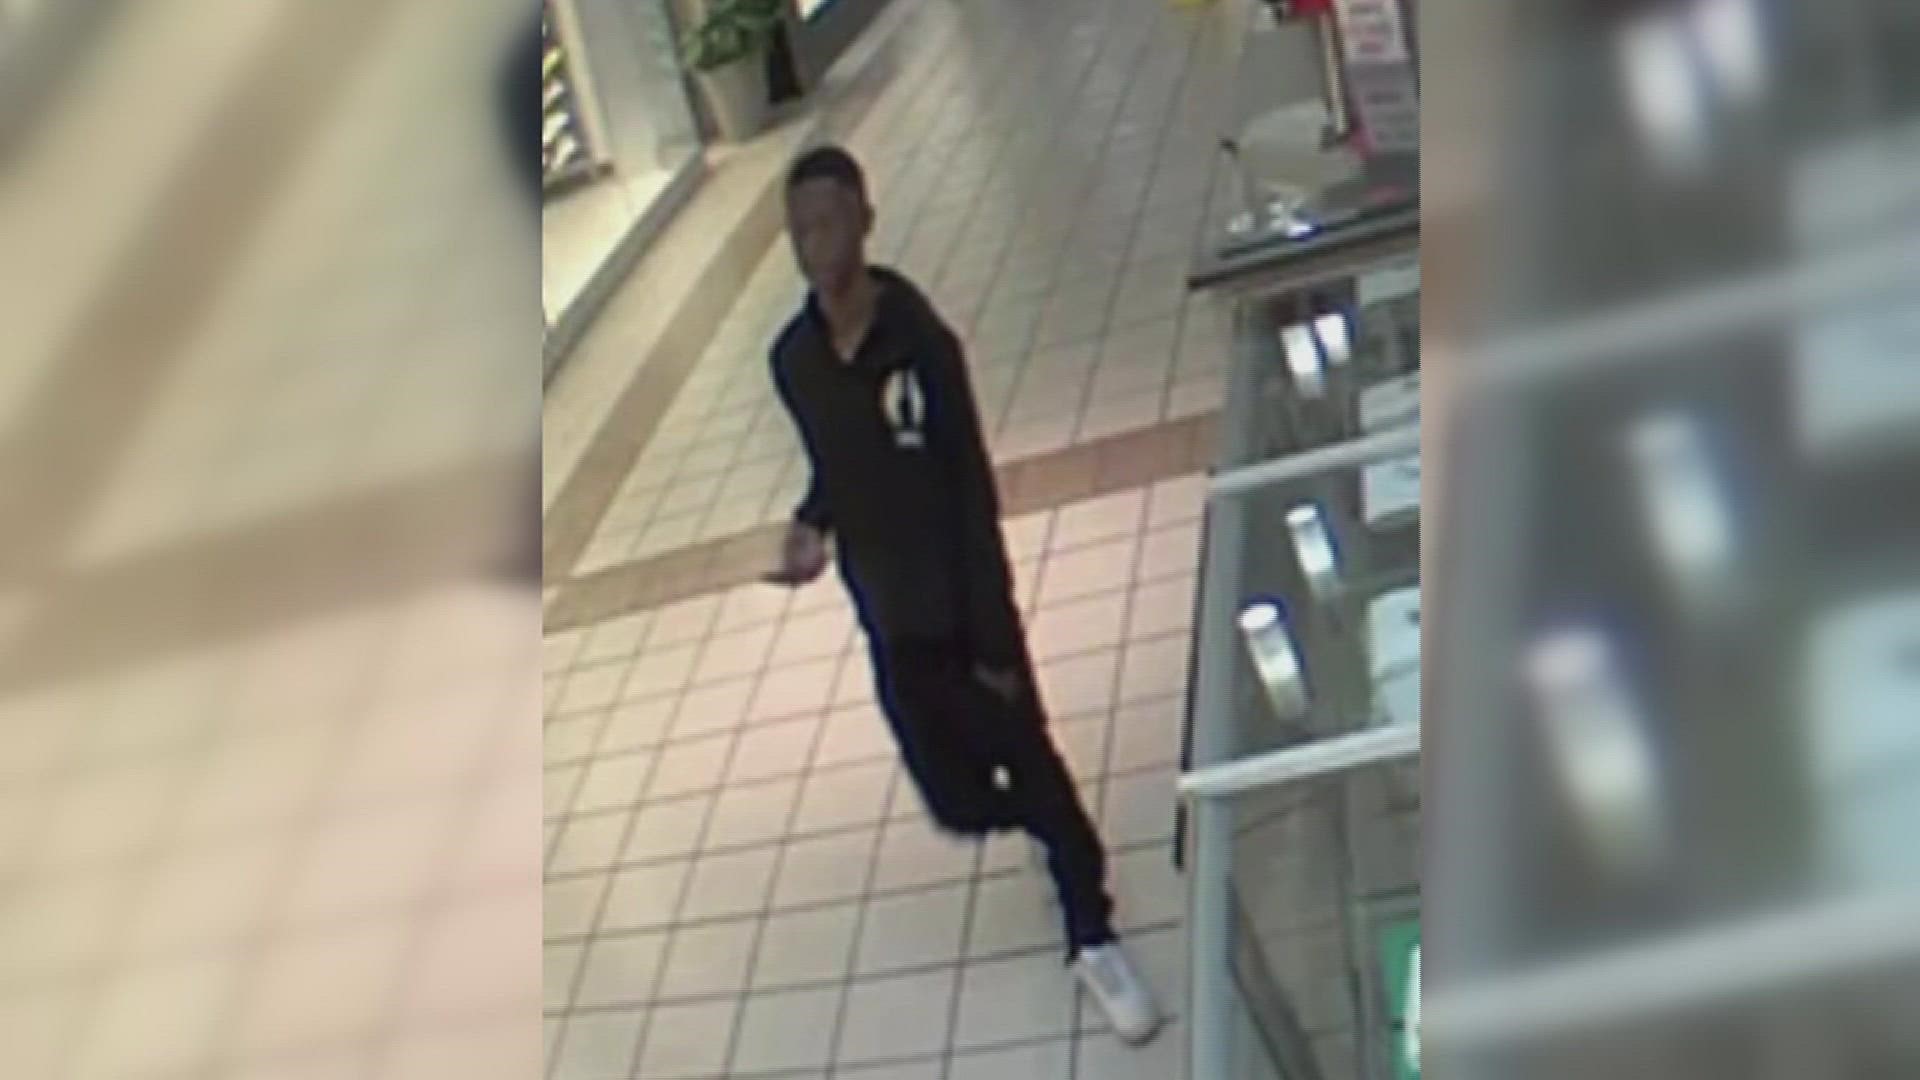 The unidentified young man was caught on surveillance cameras kicking in a glass display case.